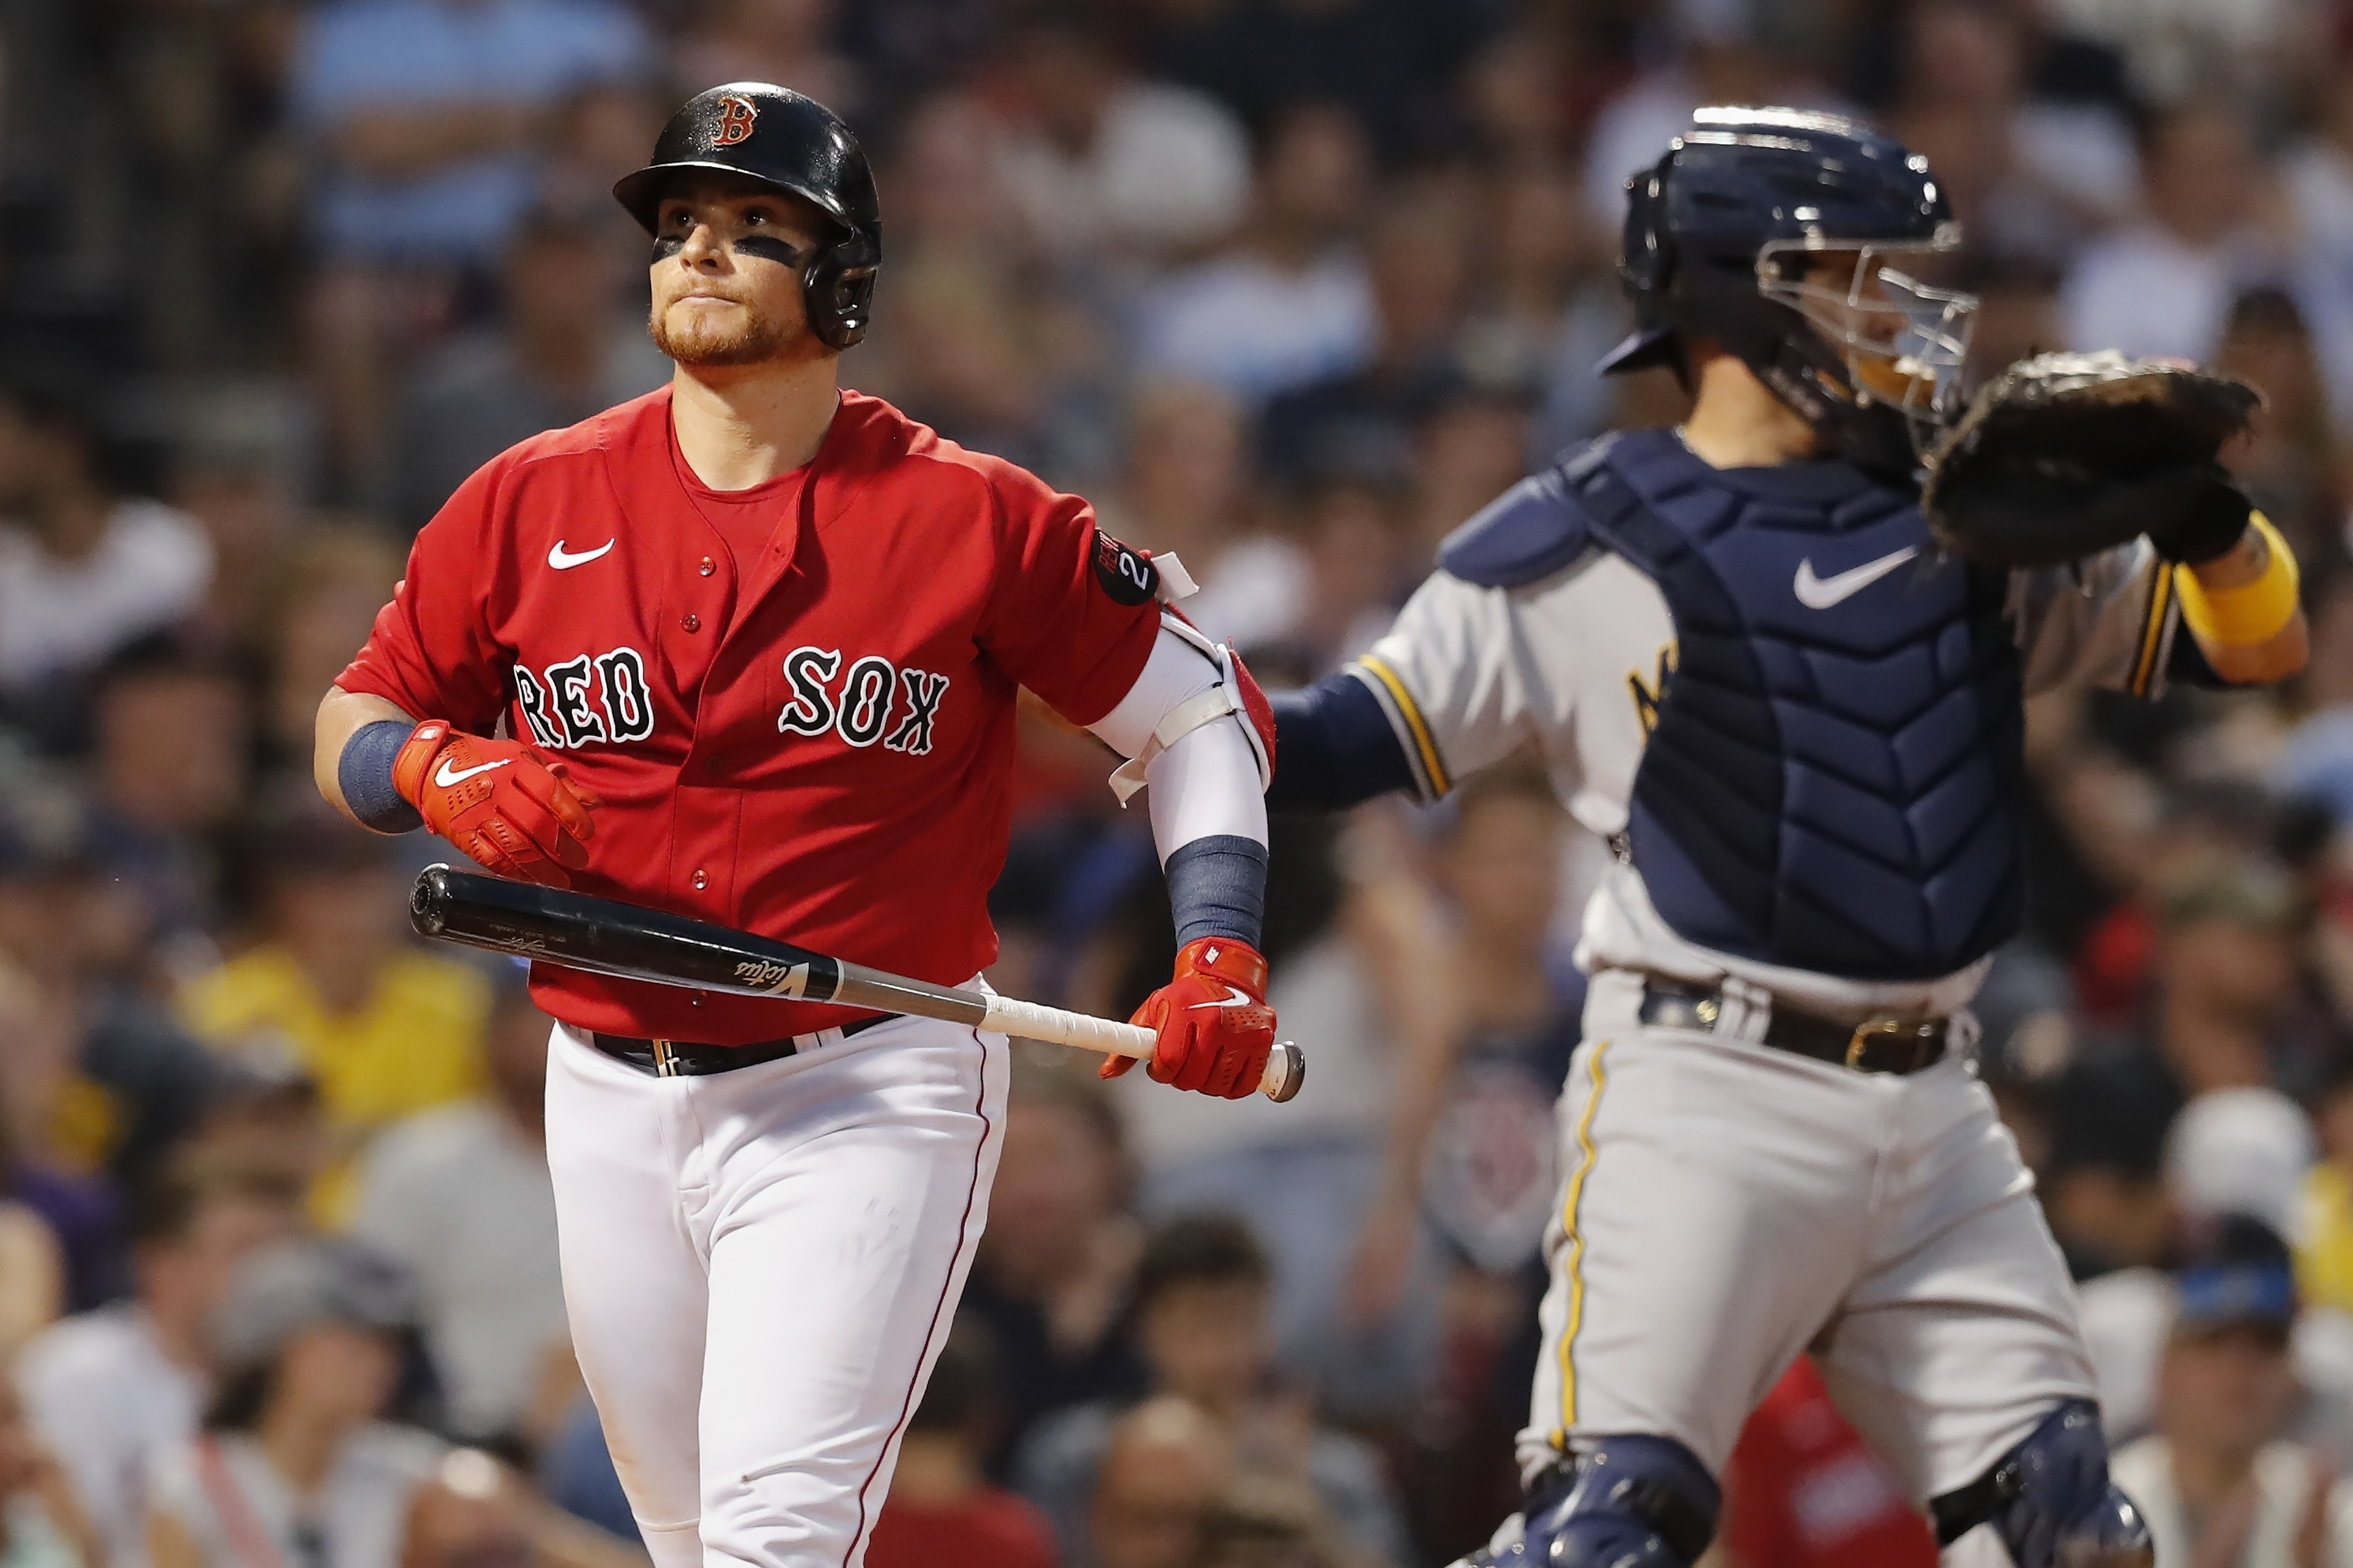 Thanks to his wedding, Red Sox catcher Christian Vazquez got his